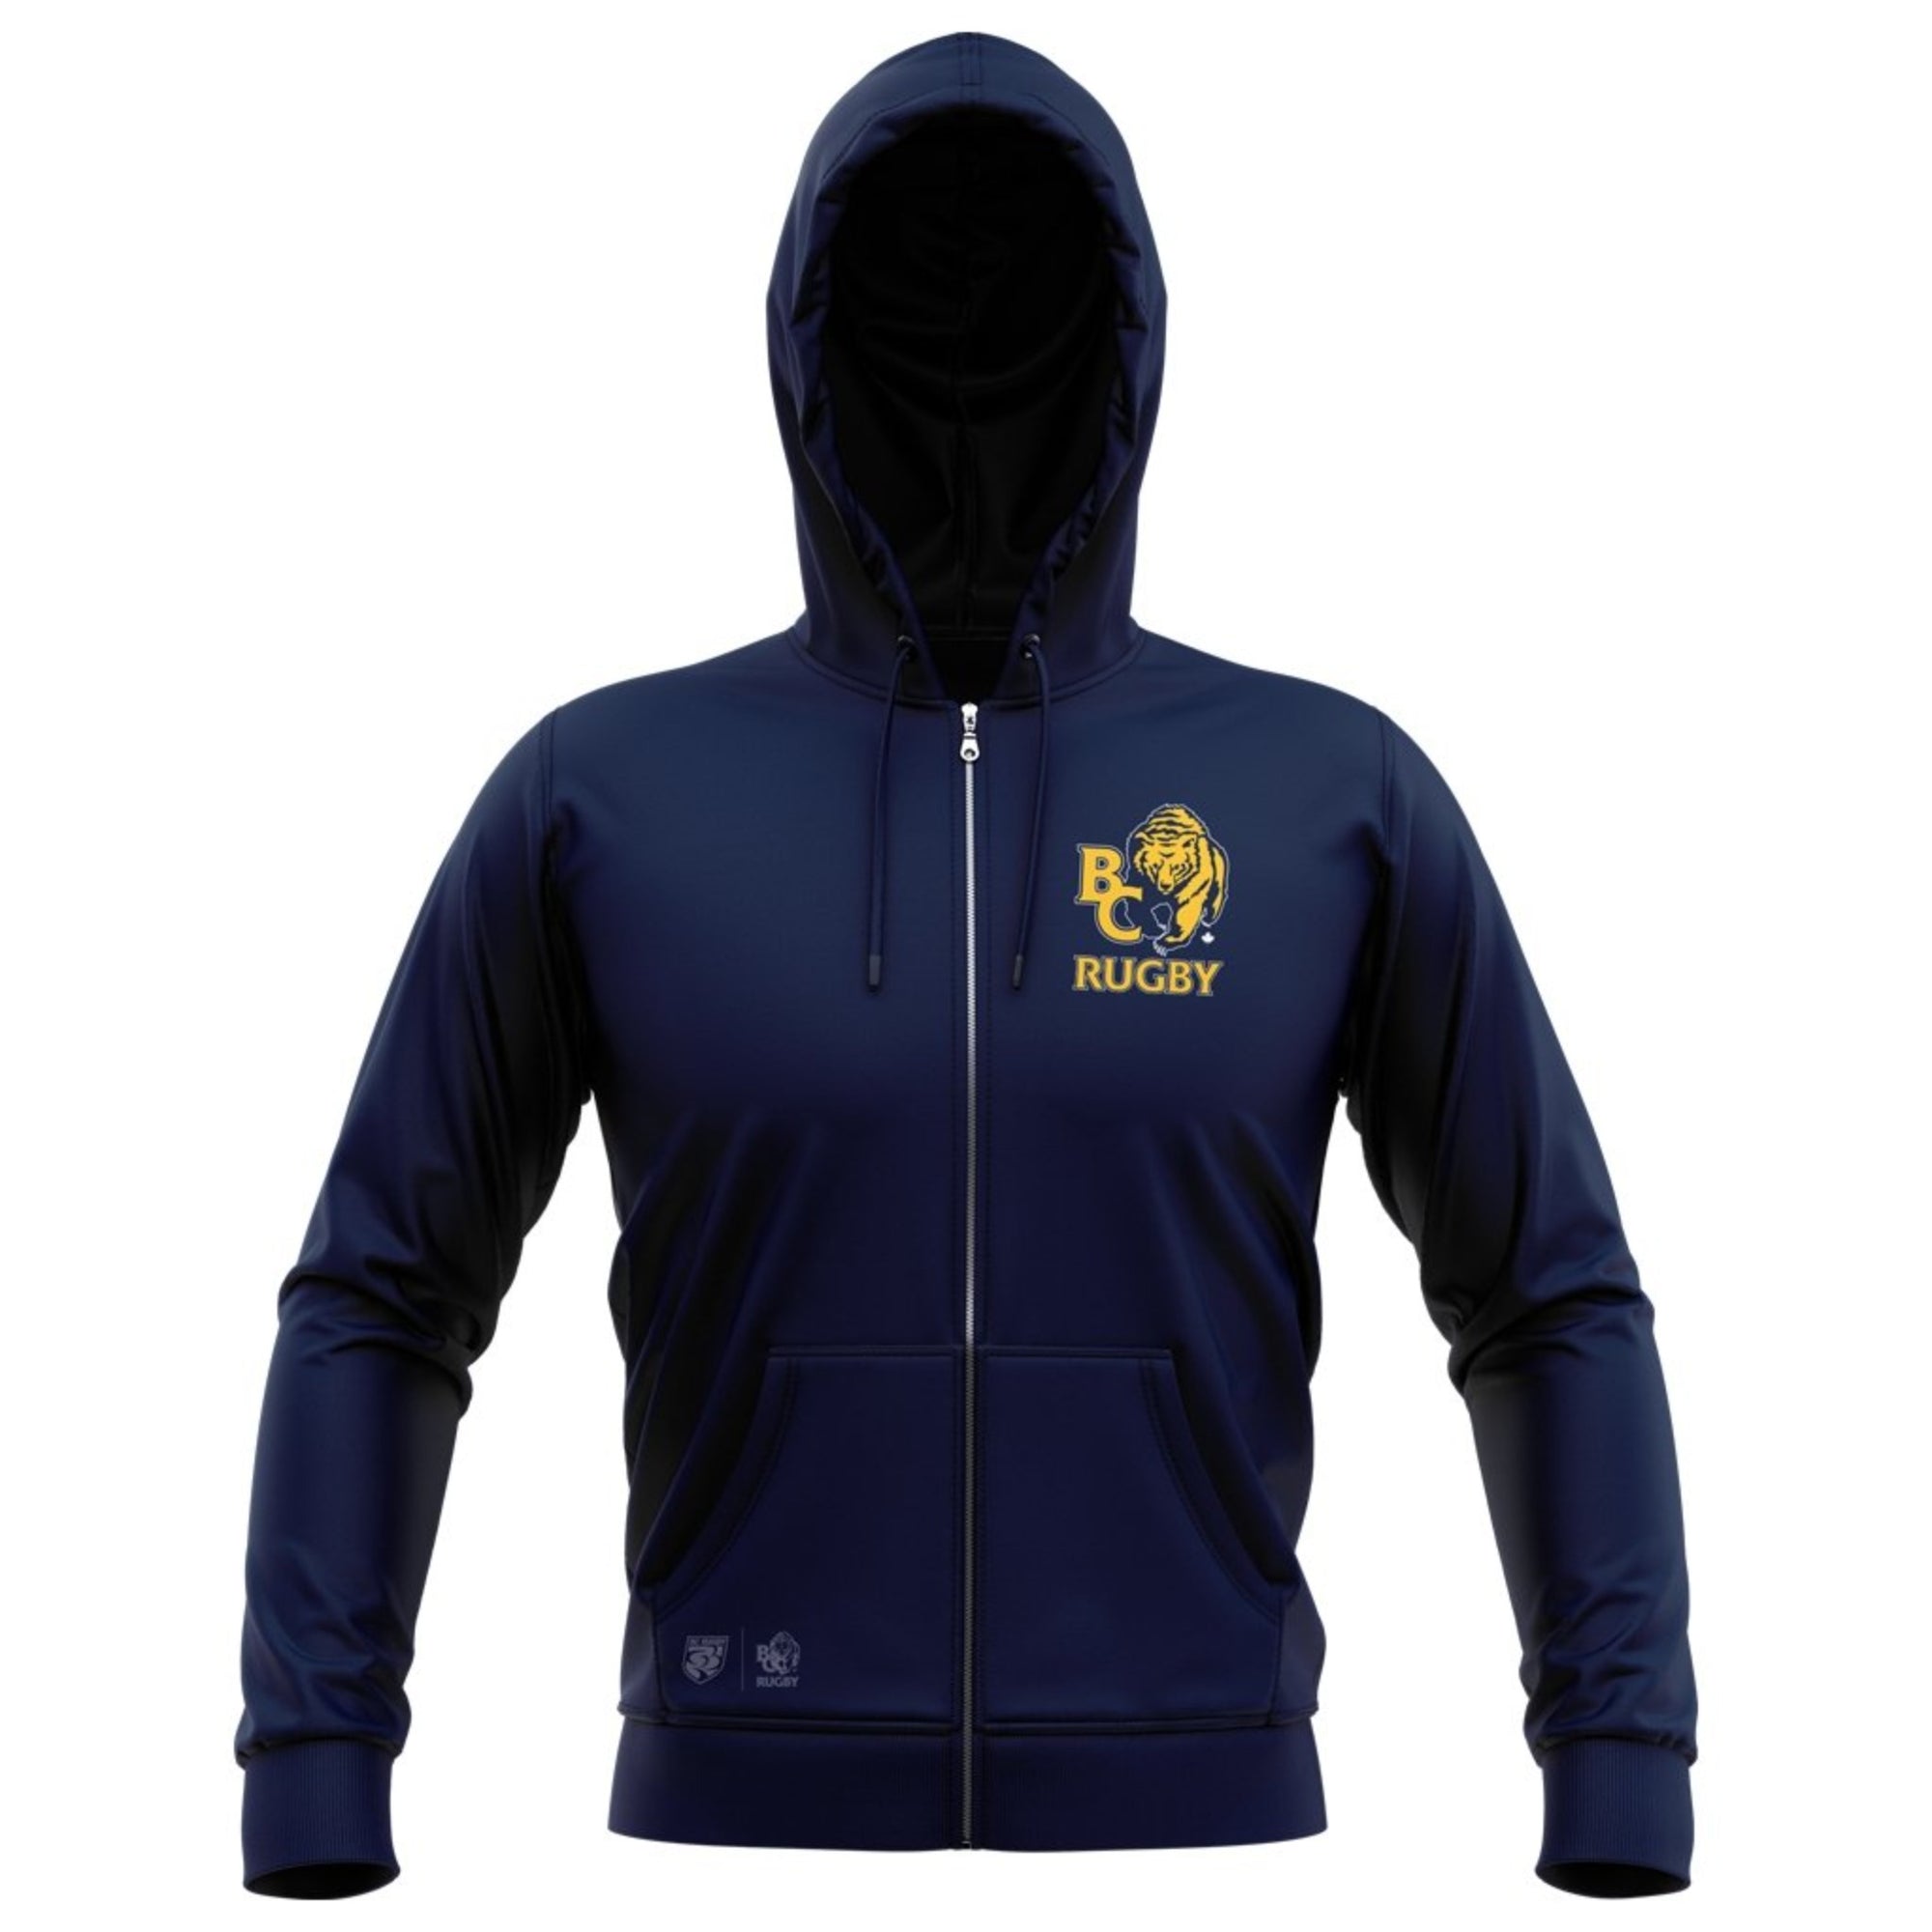 BC Rugby 2021 "Small Logo Team" Full Zip Hoodie - Adult Unisex - www.therugbyshop.com www.therugbyshop.com ADULT UNISEX / NAVY / S XIX Brands HOODIES BC Rugby 2021 "Small Logo Team" Full Zip Hoodie - Adult Unisex